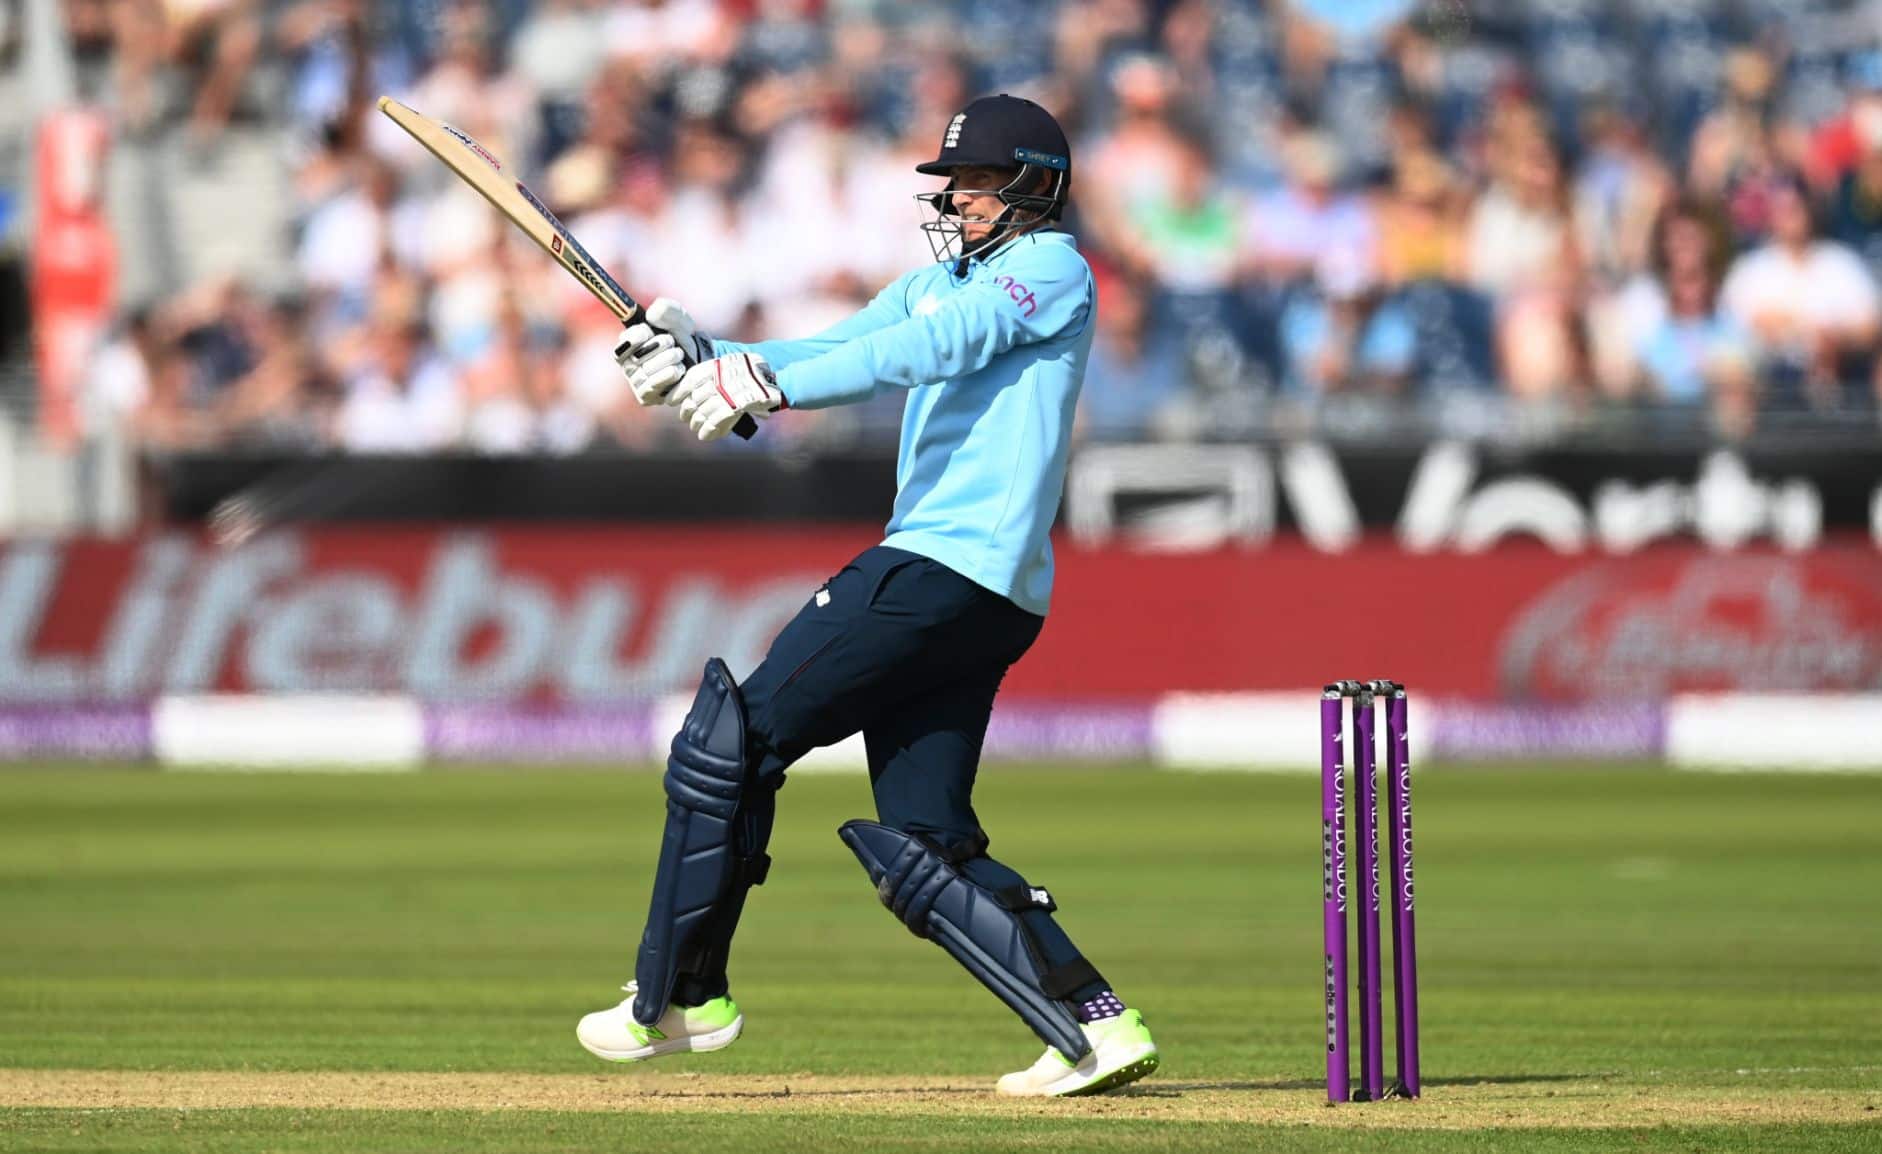 Joe Root backs England to defend World Cup trophy